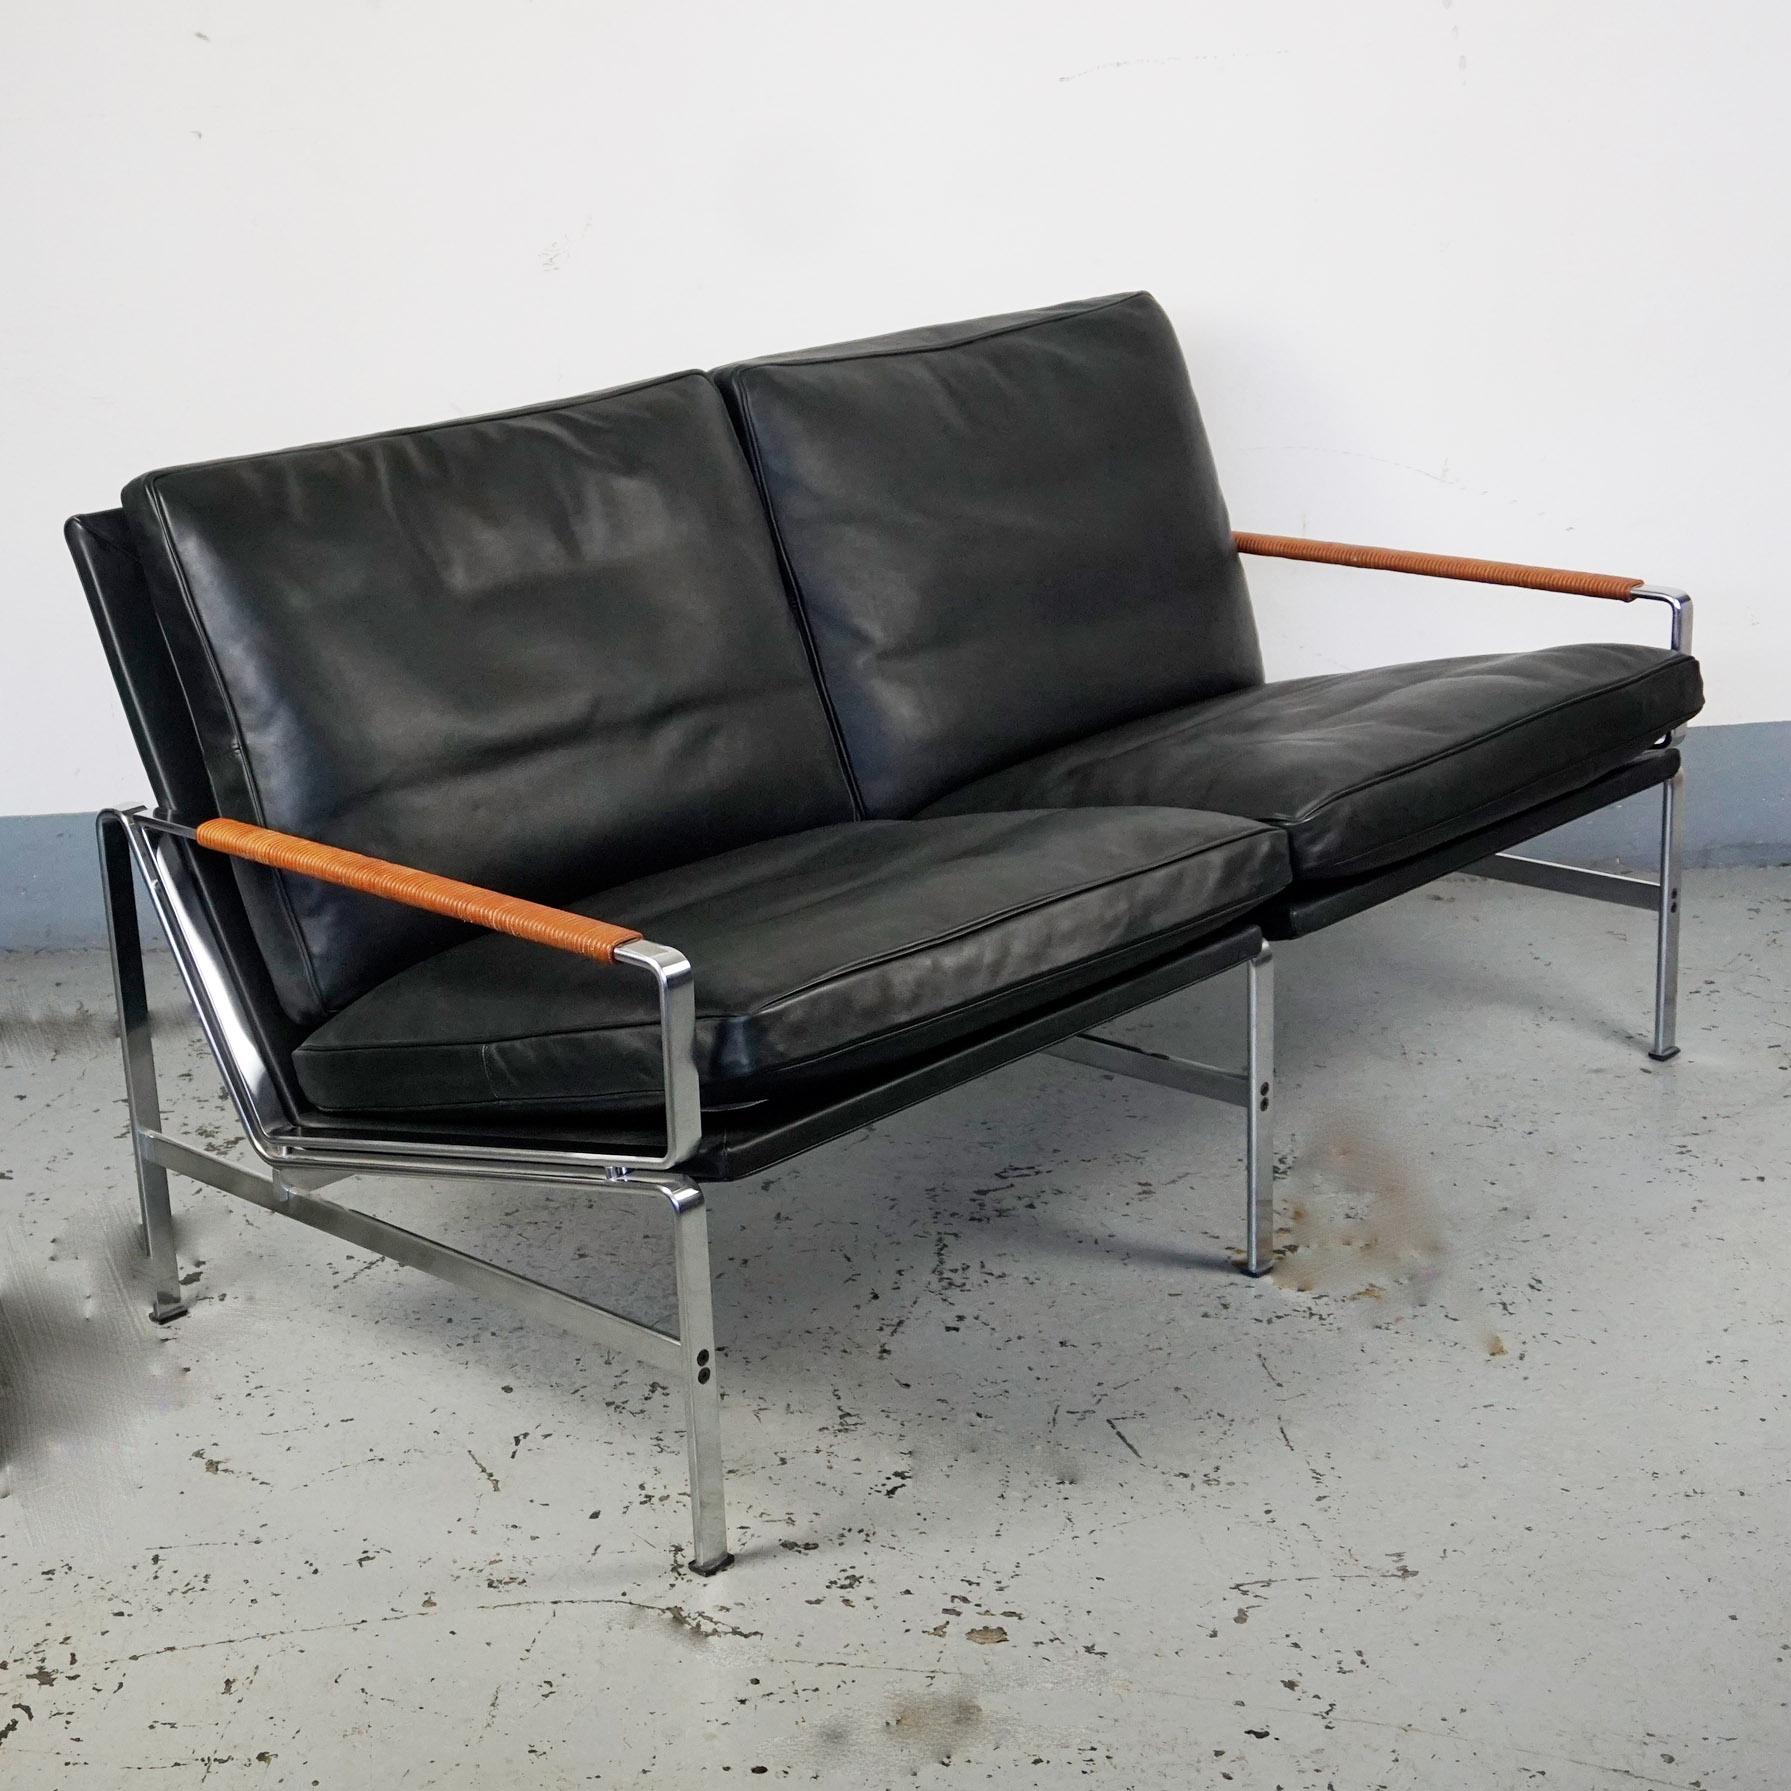 Iconic Scandinavian design, produced circa 1990s by Lange Production Denmark, Mod. FK 6720. As this sofa has been on storage for years and has never been used it is in excellent mint condition.